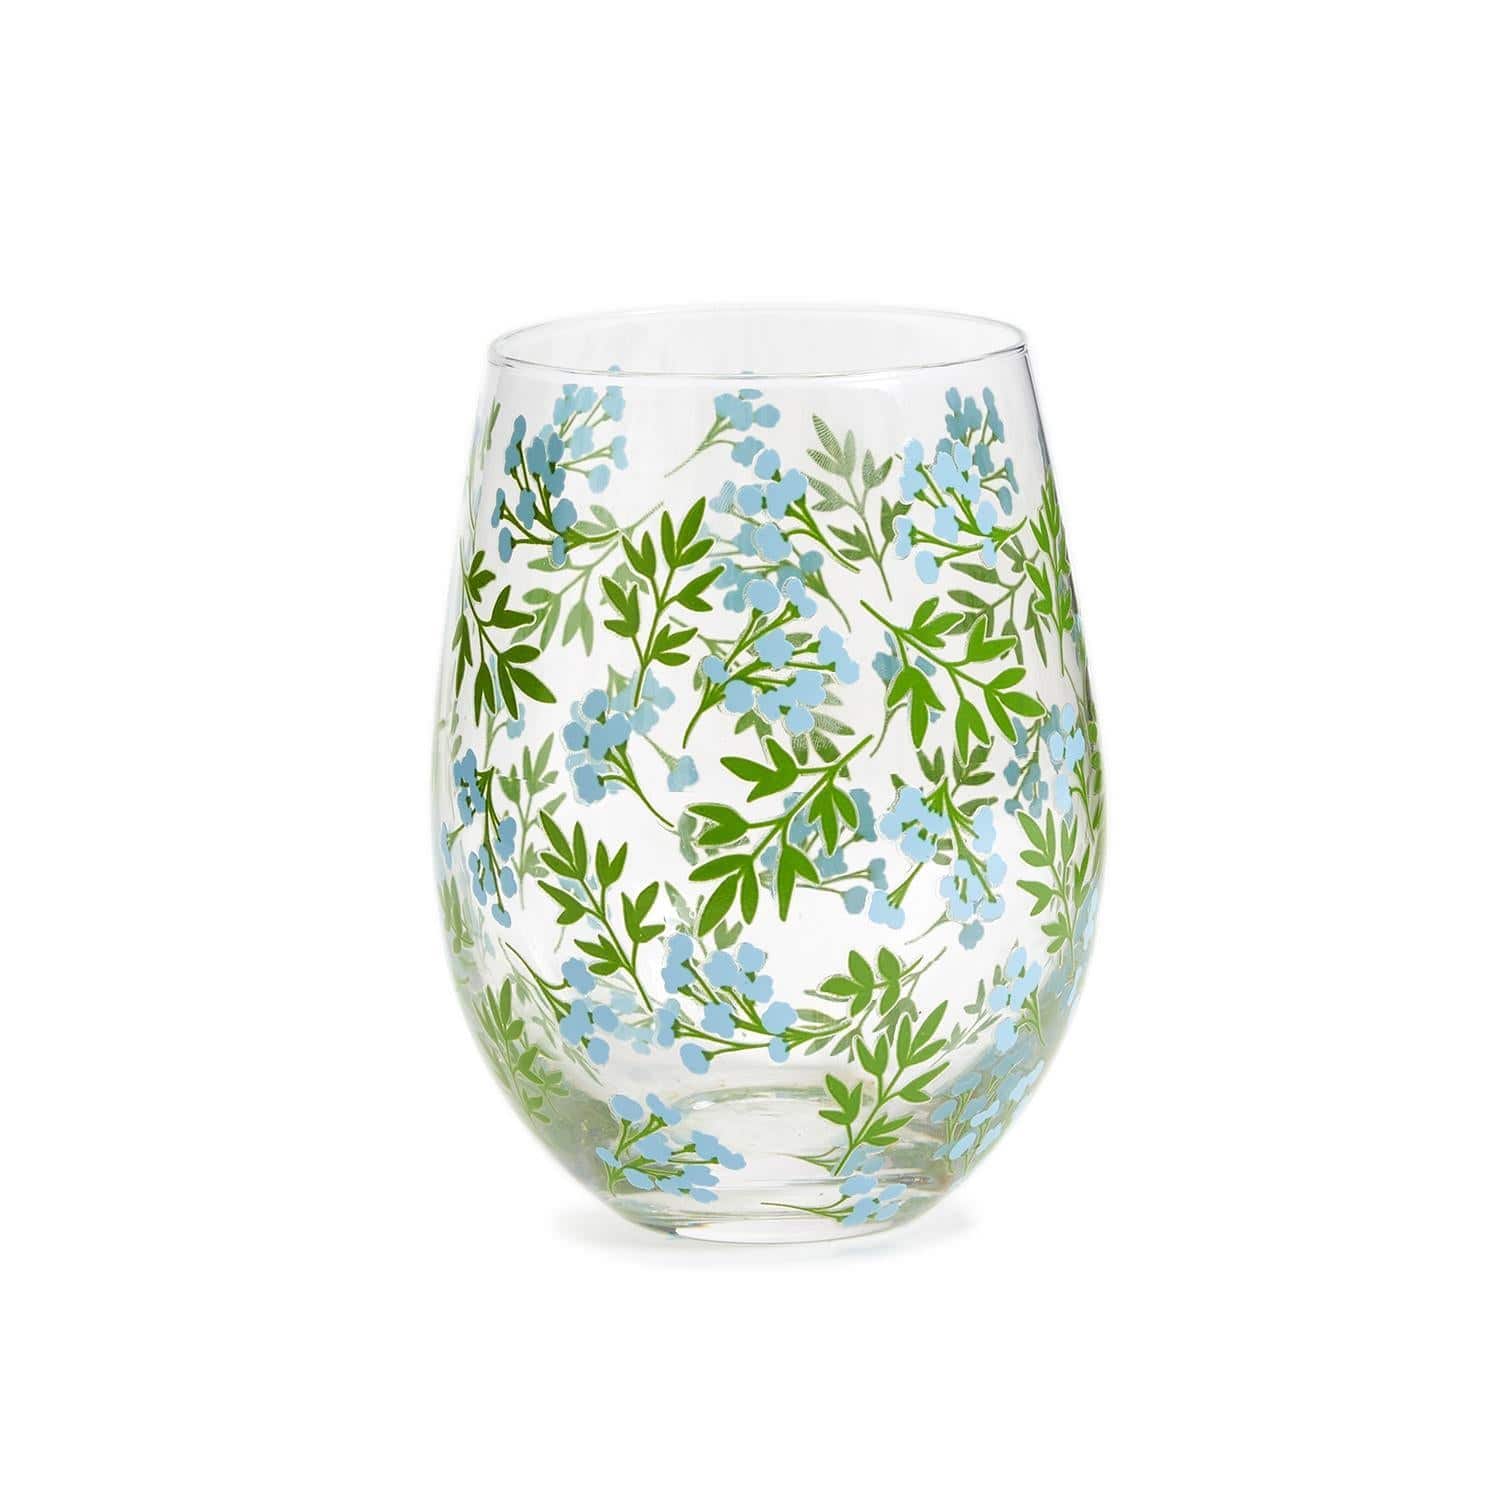 COUNTRYSIDE STEMLESS WINE GLASS - Findlay Rowe Designs